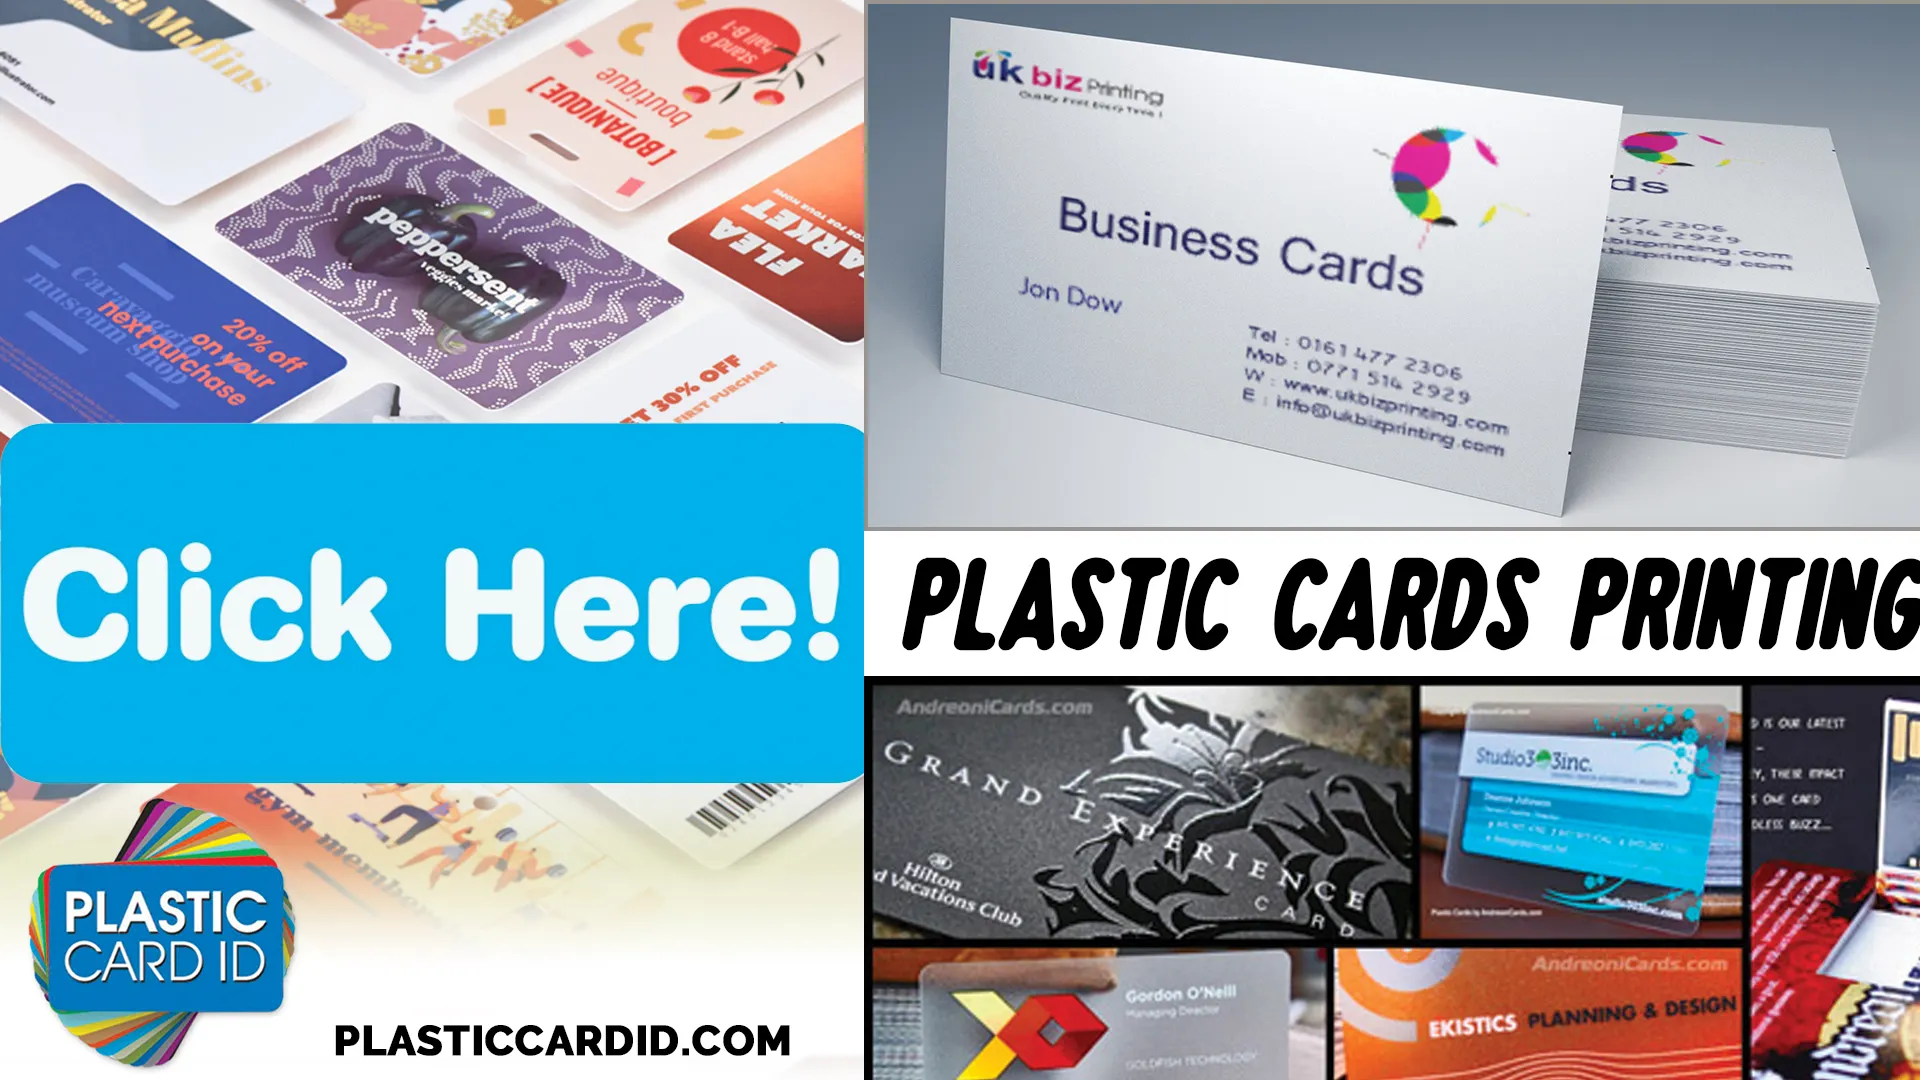 Security and Personalization: Core Matica Principles in Every Card We Print